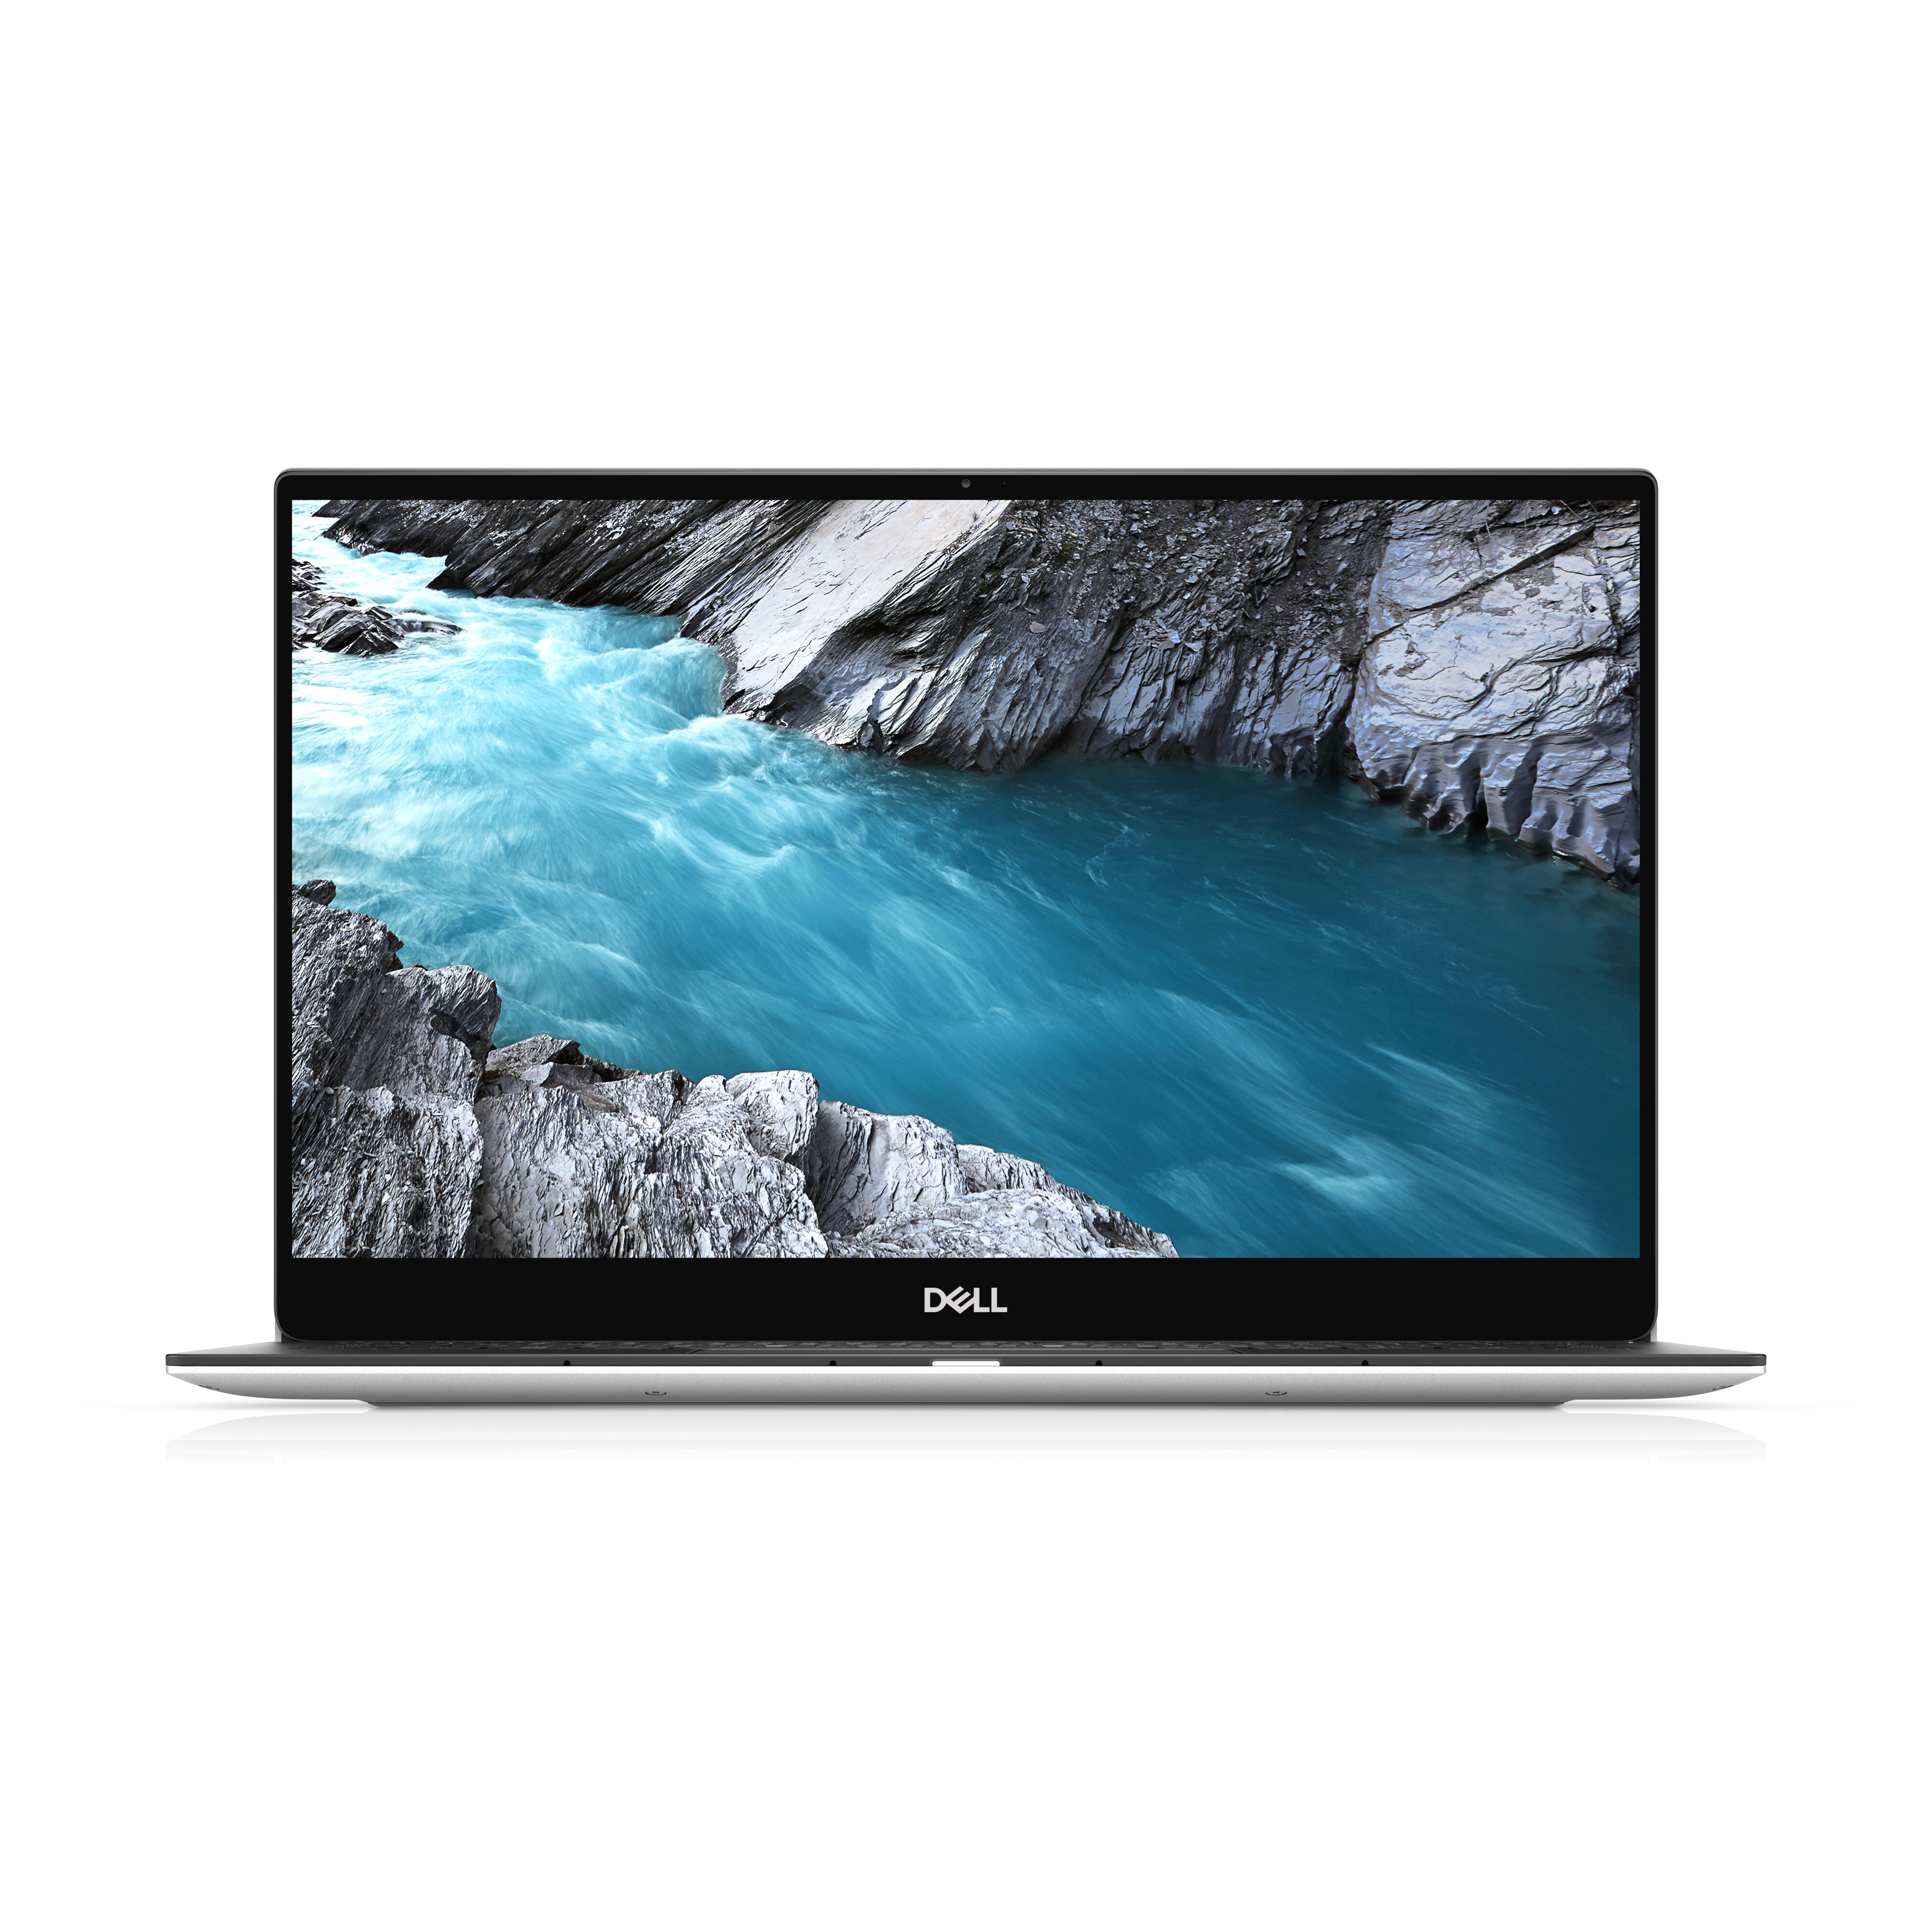 Dell XPS 13 (7390) Laptop | Dell Malaysia